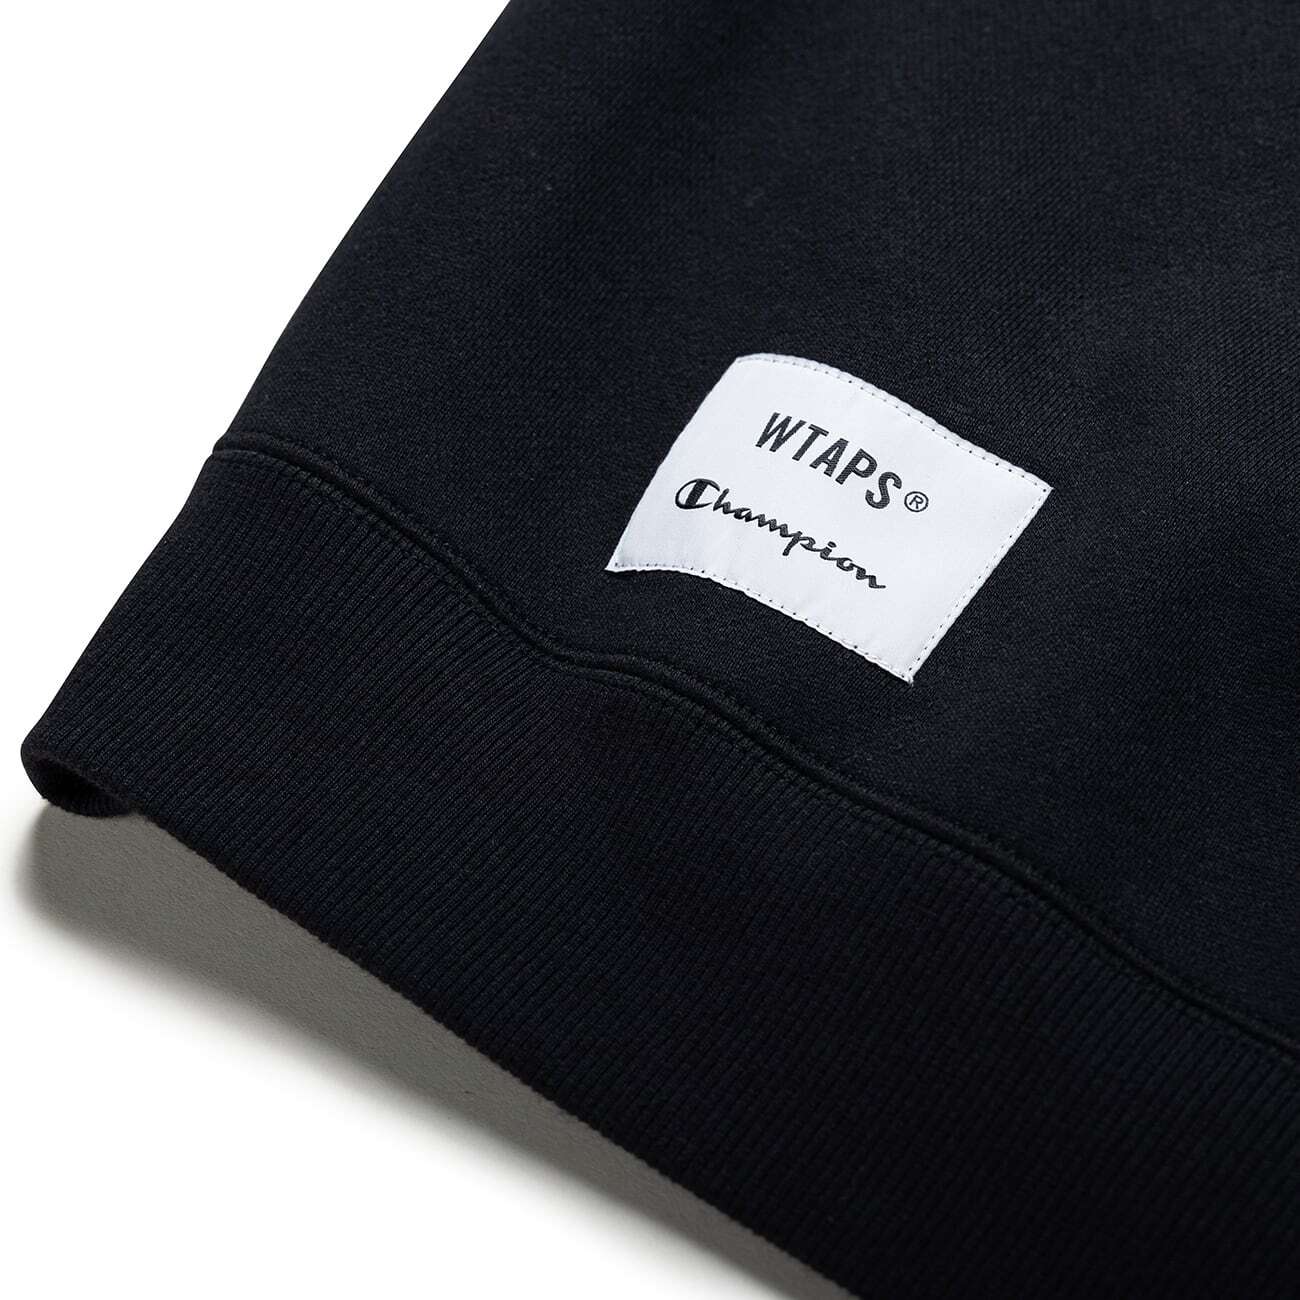 Wtaps Academy Trousers CTPL .Champion L | kensysgas.com